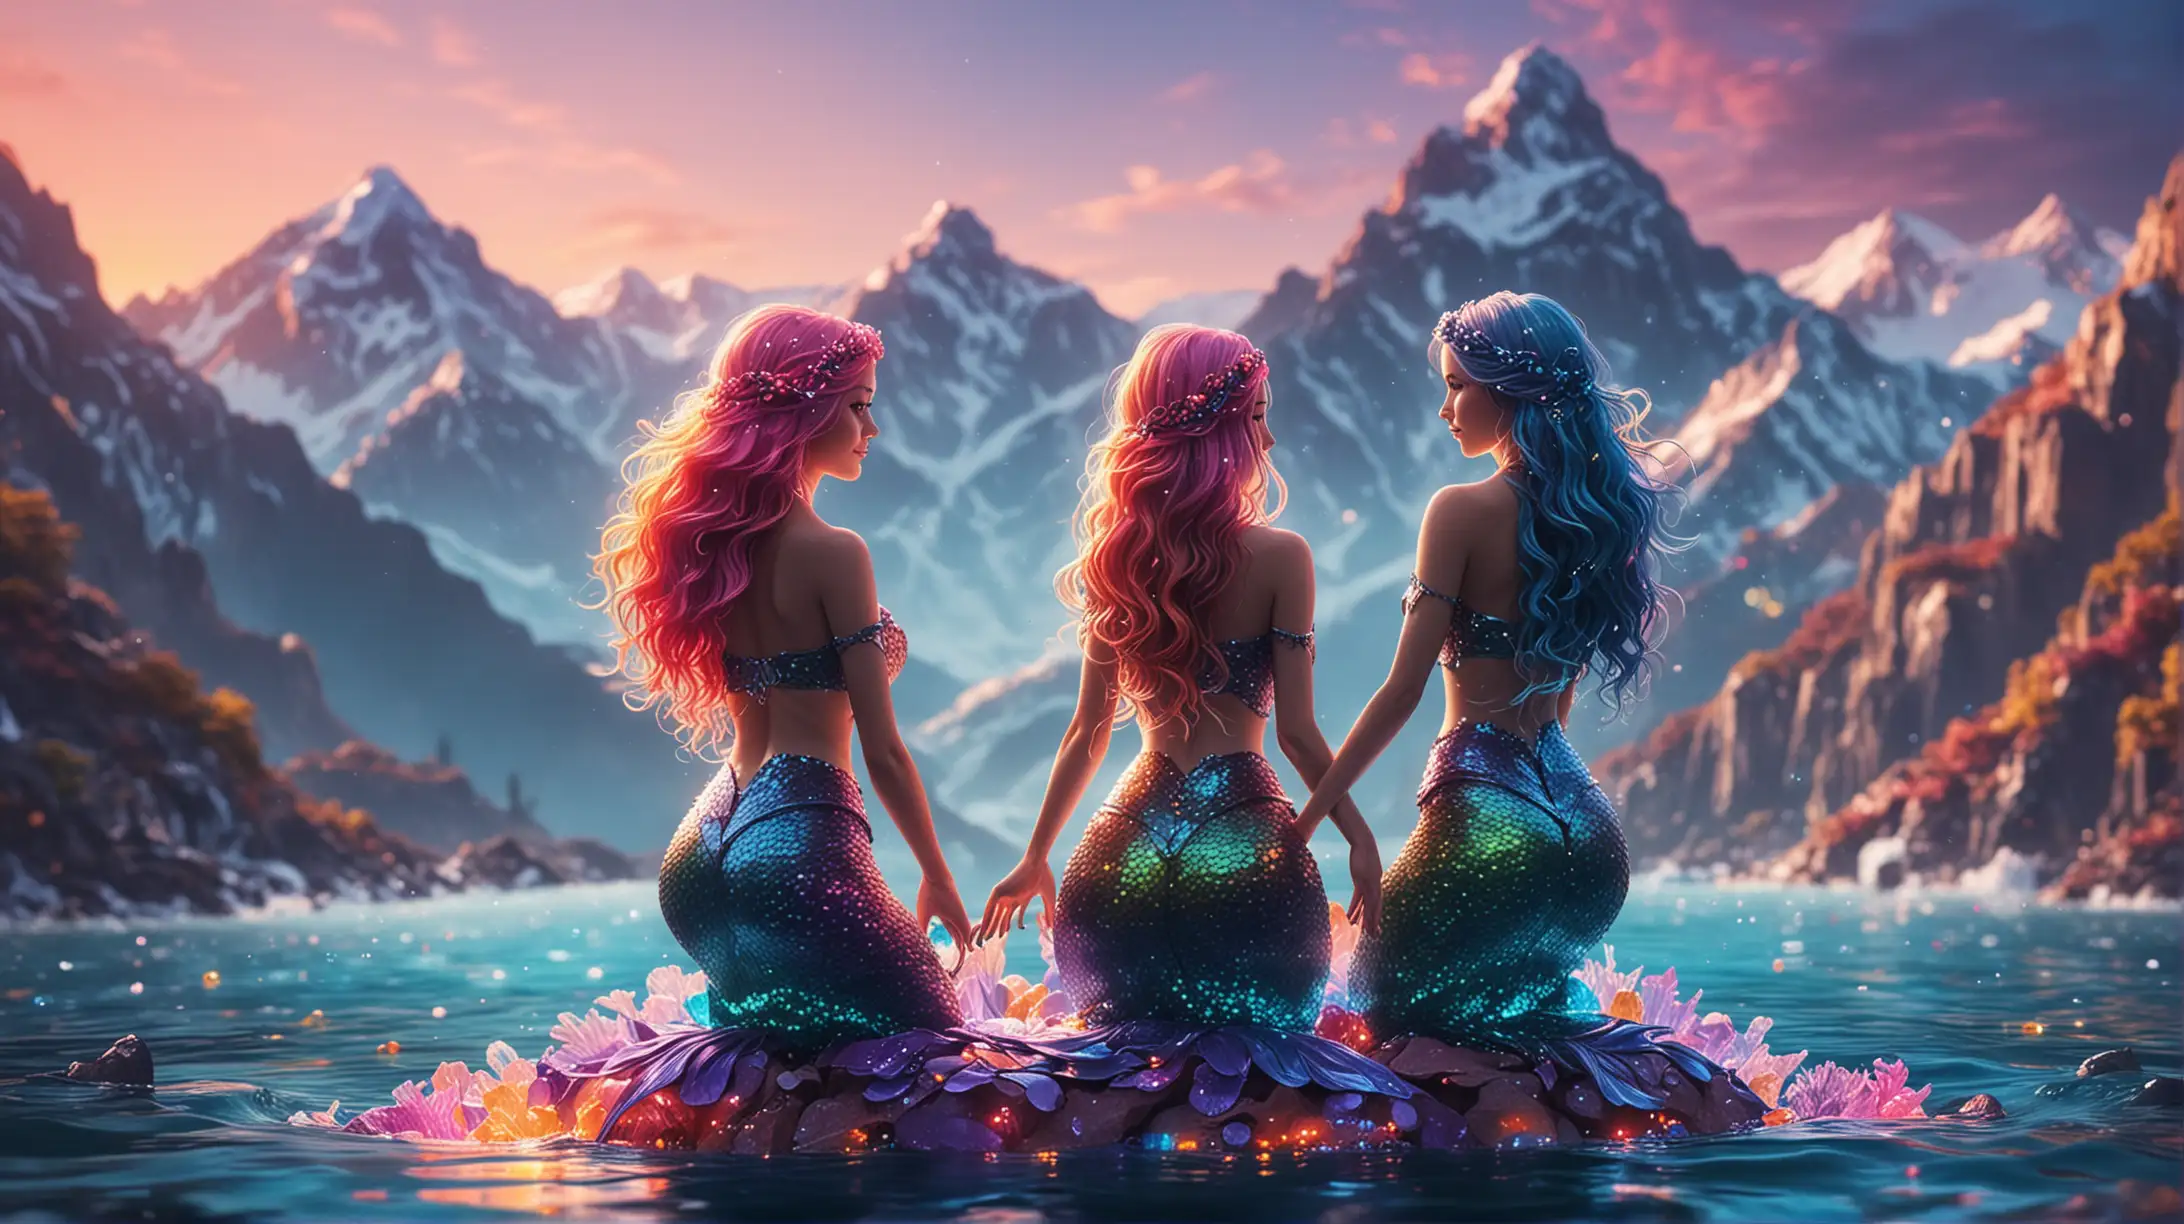 
random forms, creative, multicolor background, bokeh:2, neon style, realistic, two mermaids, mountains